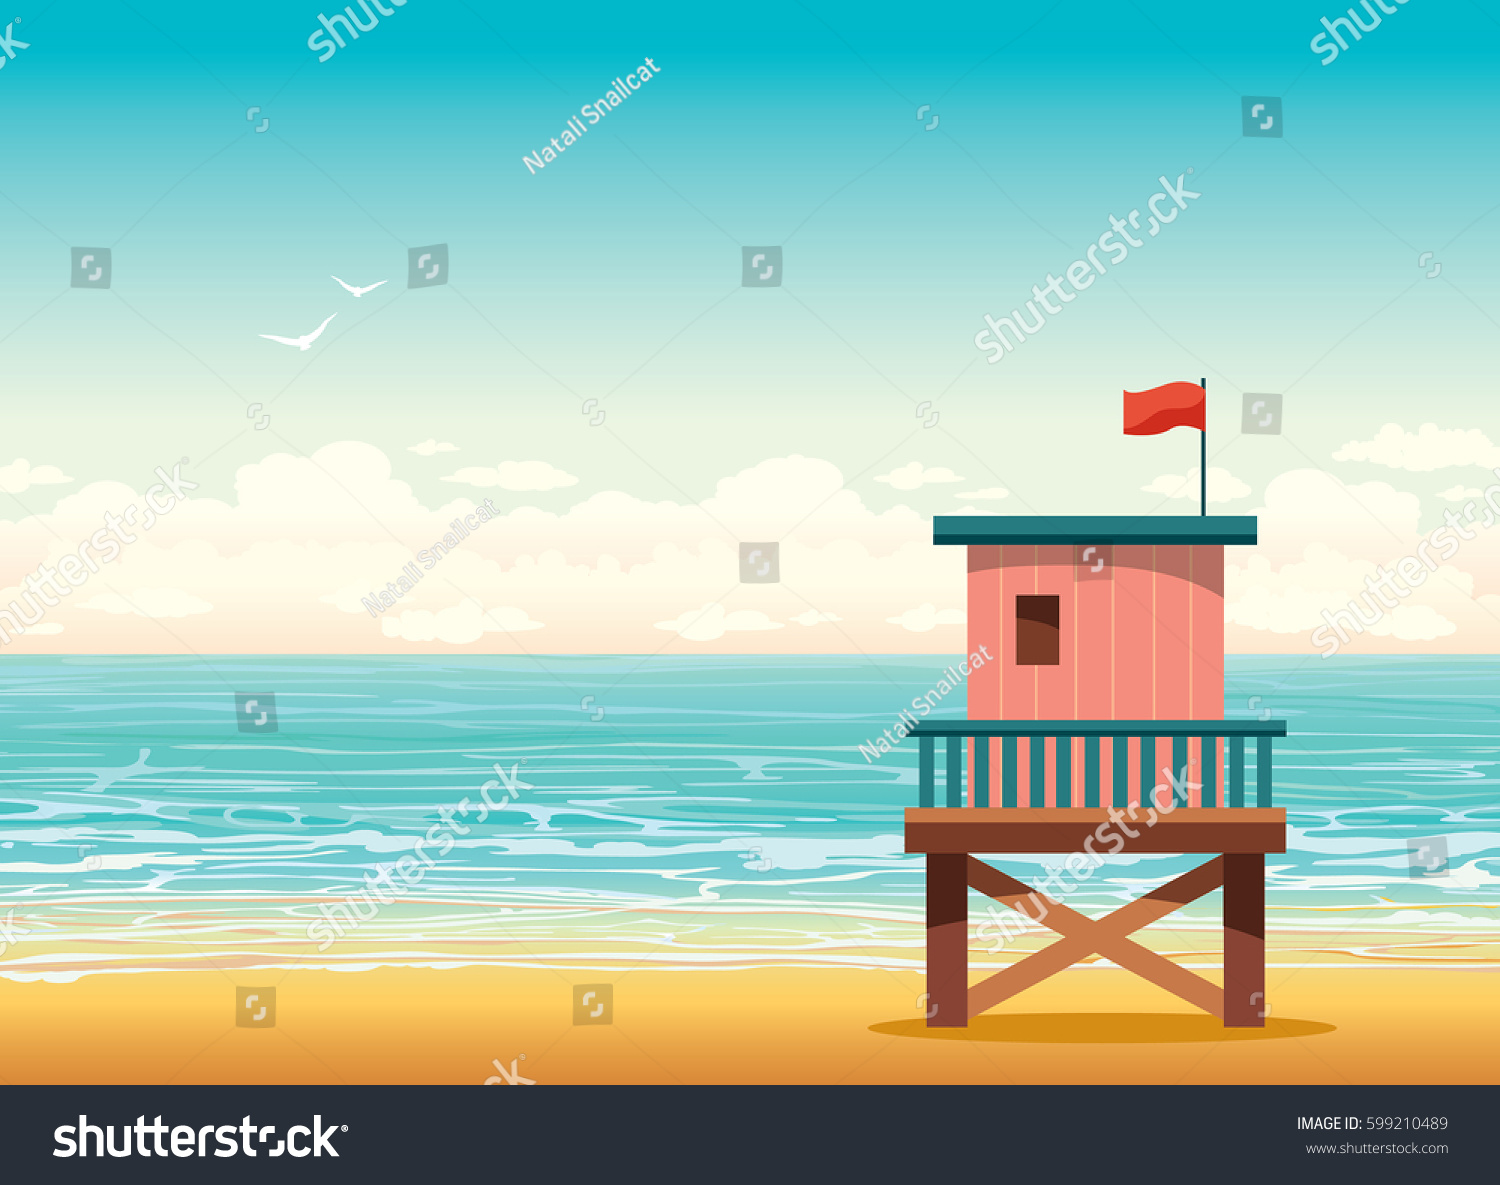 SVG of Cartoon lifeguard tower on the beach with blue ocean and cloudy sky. Vector summer illustration.  svg